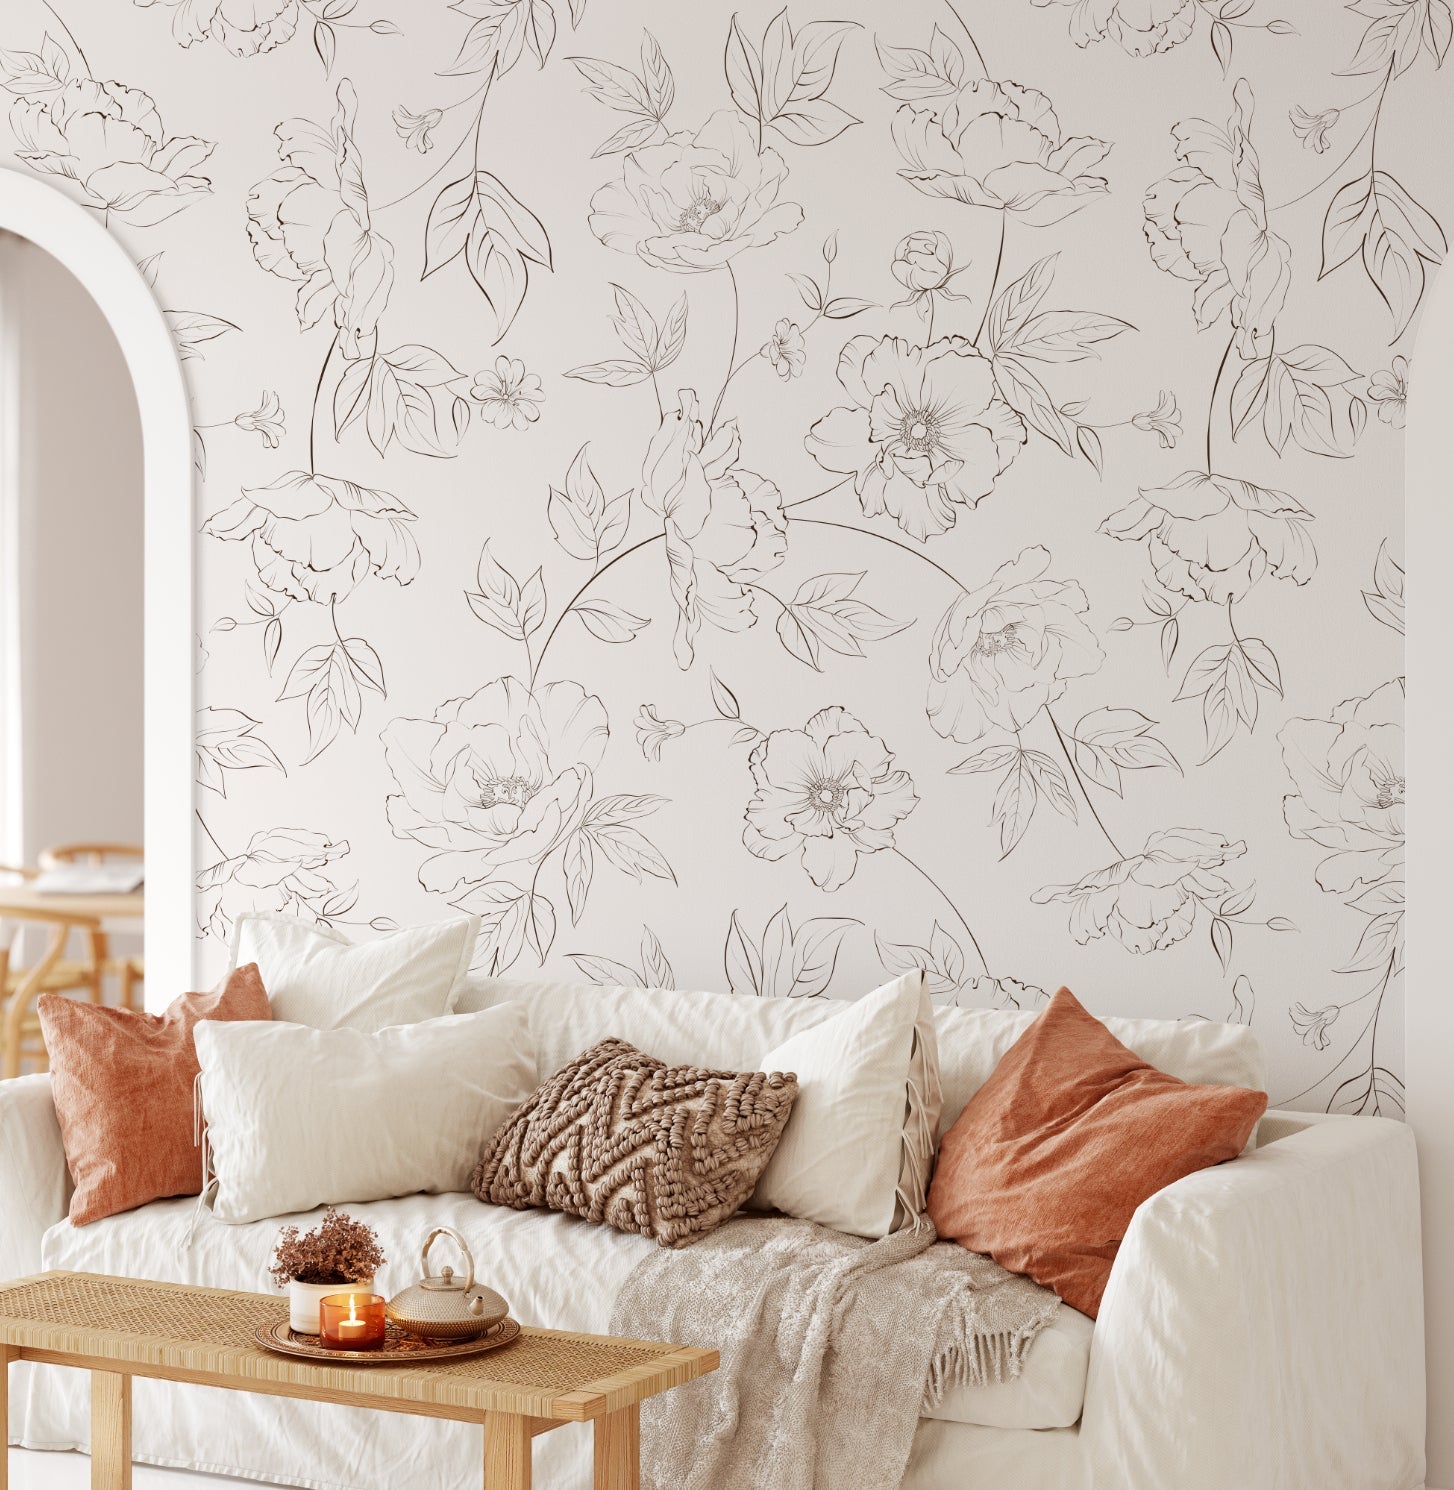 flowery wallpaper peel and stick, removable wallpaper canada, peel and stick wallpaper canada